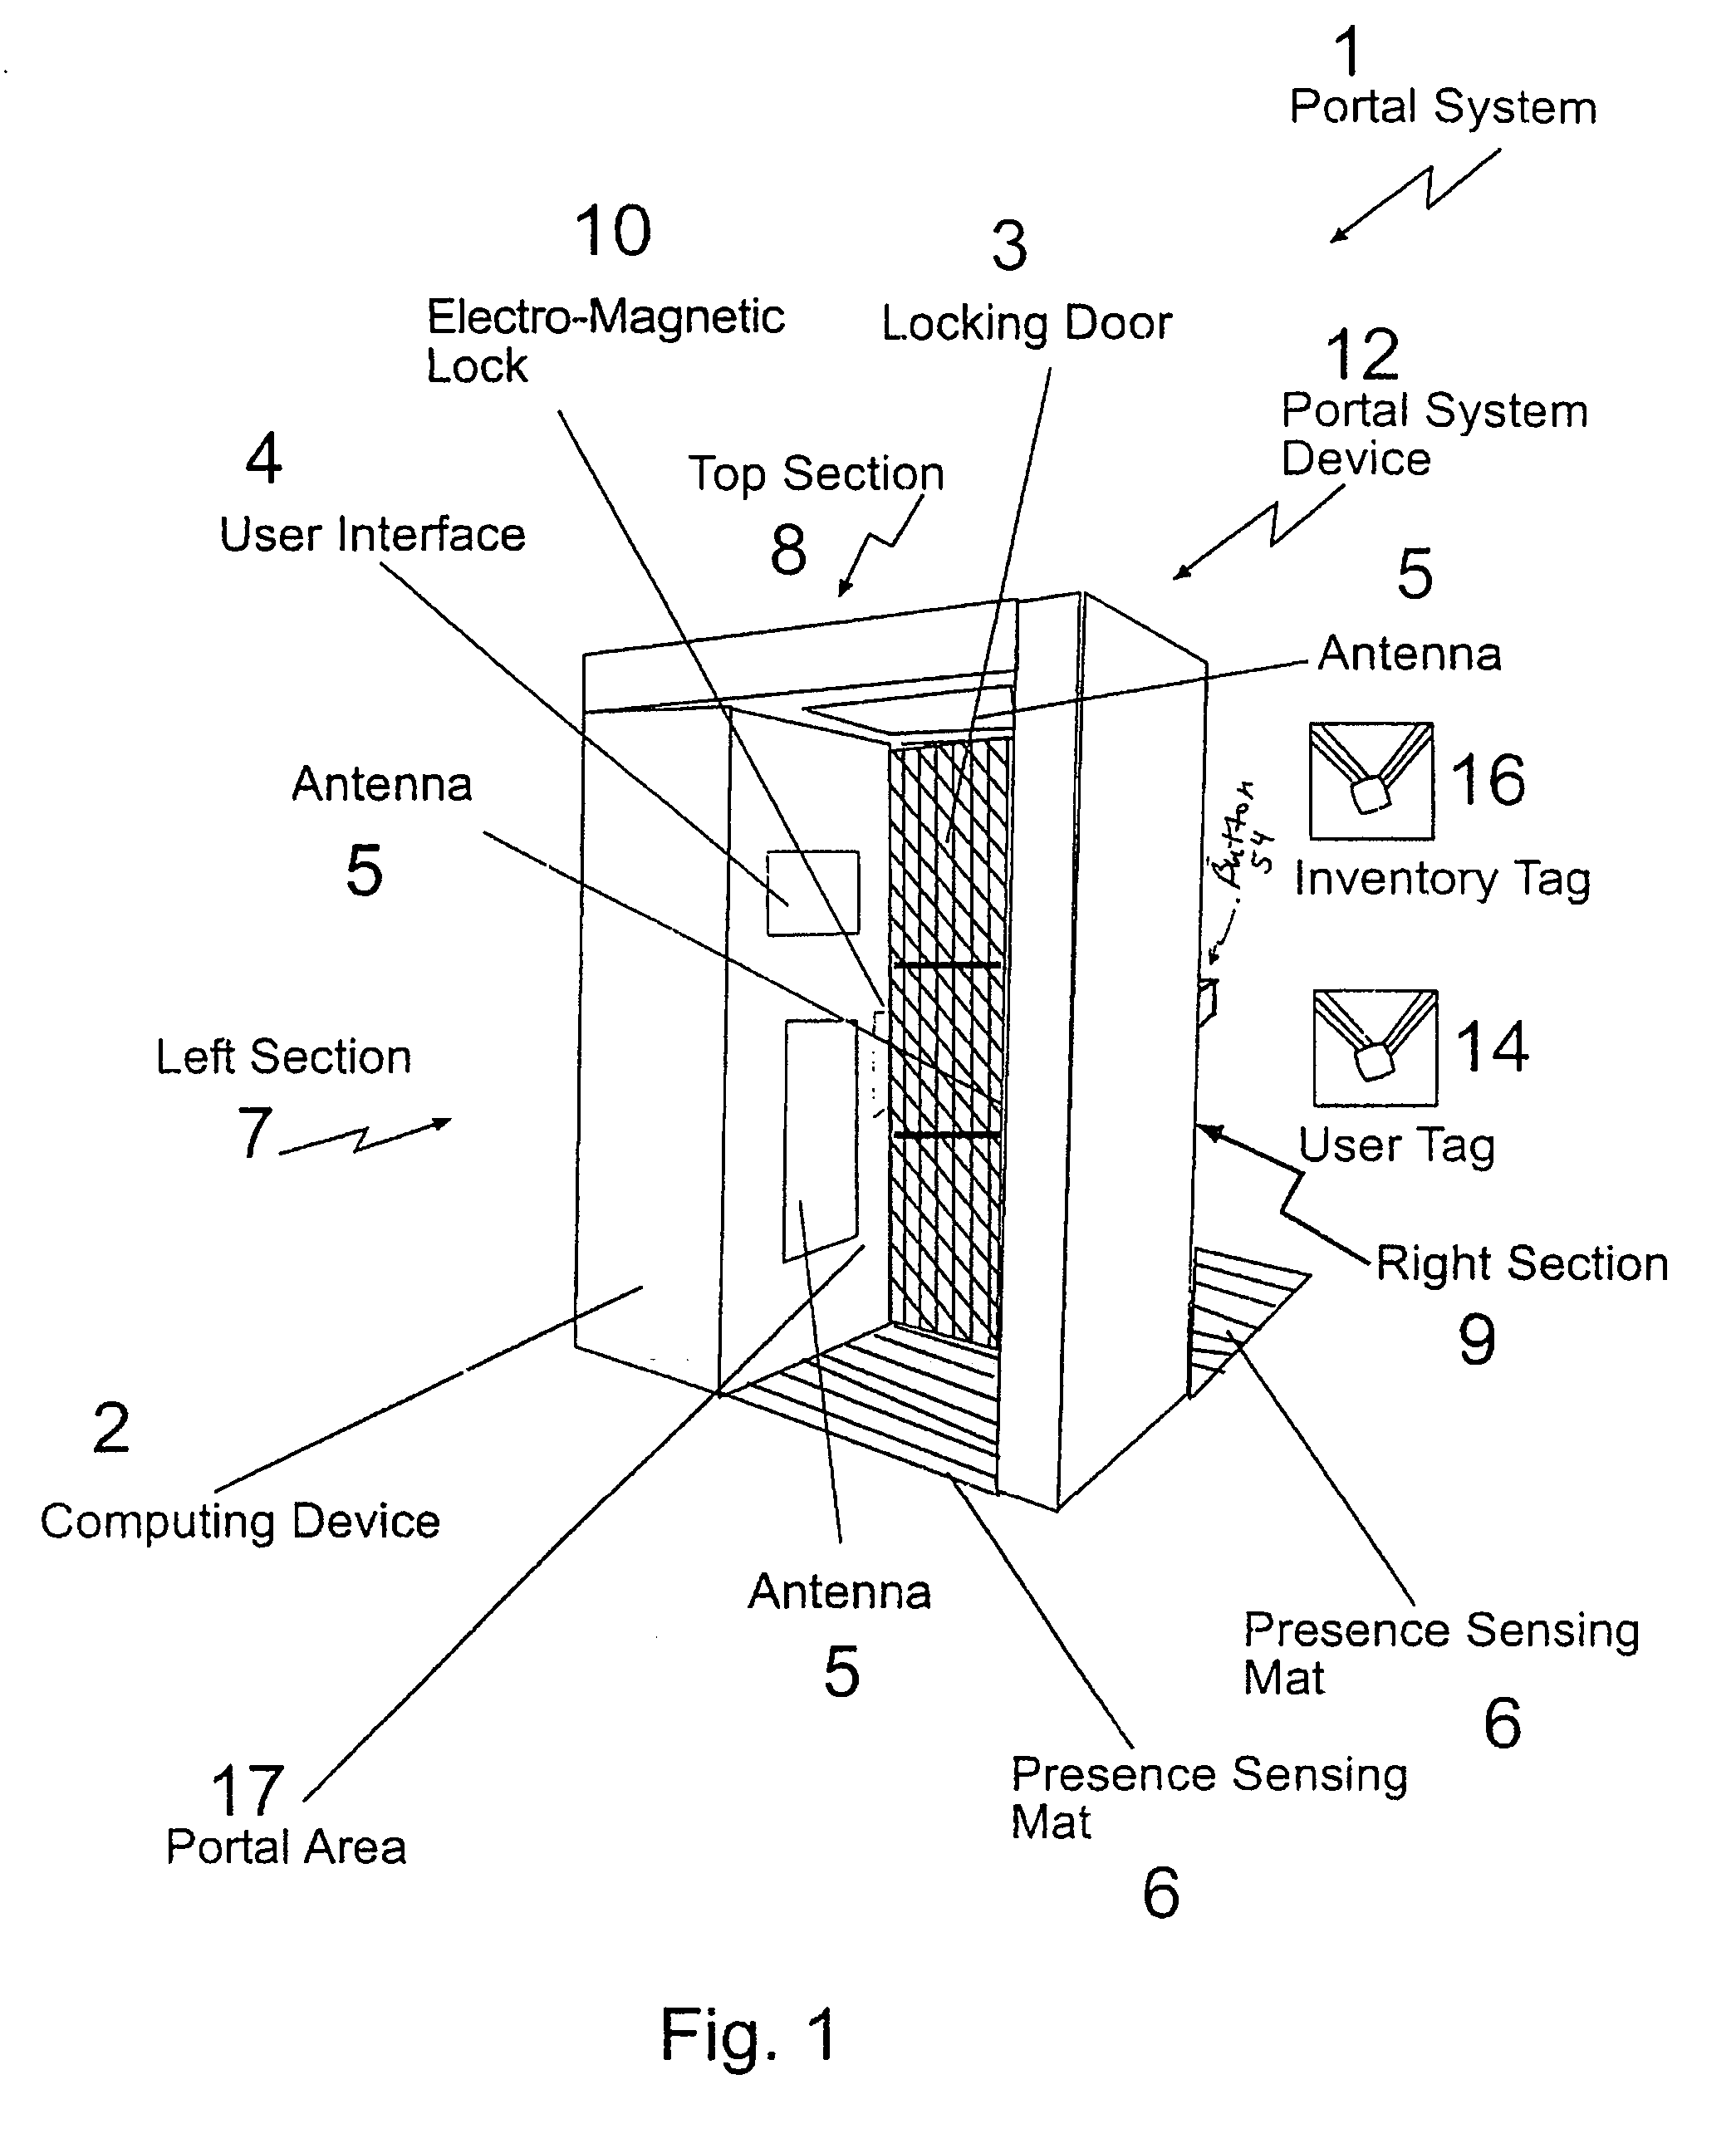 Portal system for a controlled space